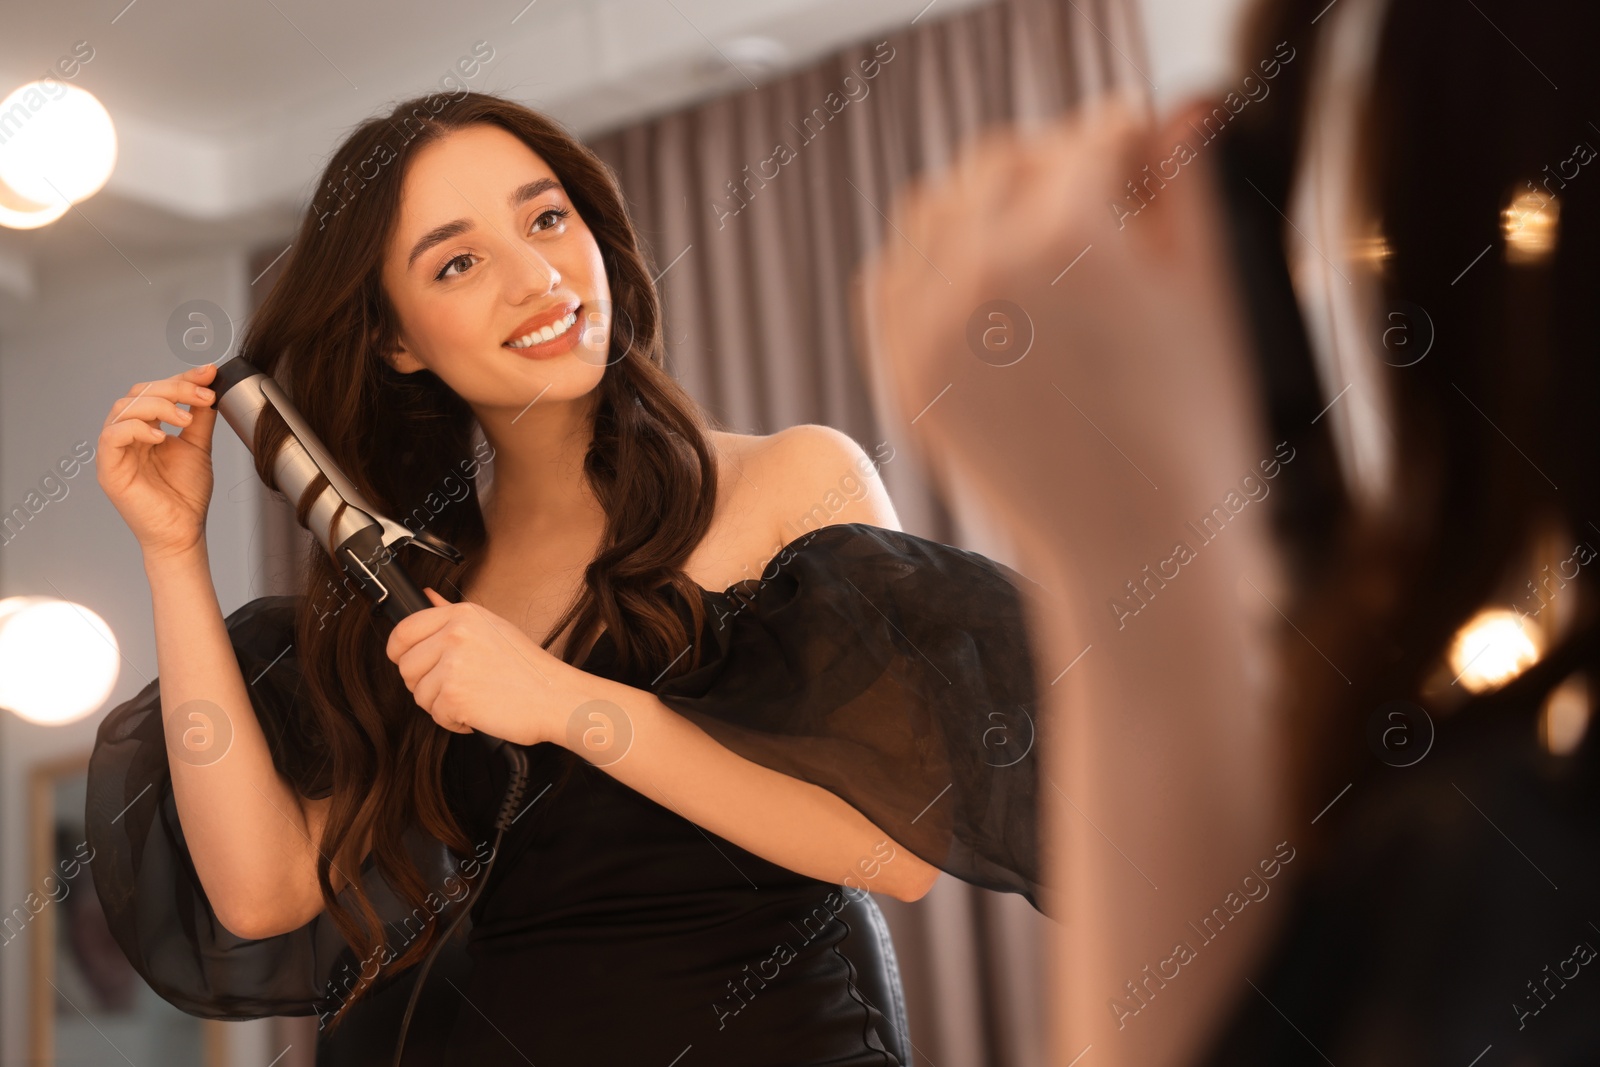 Photo of Smiling woman using curling hair iron near mirror at home